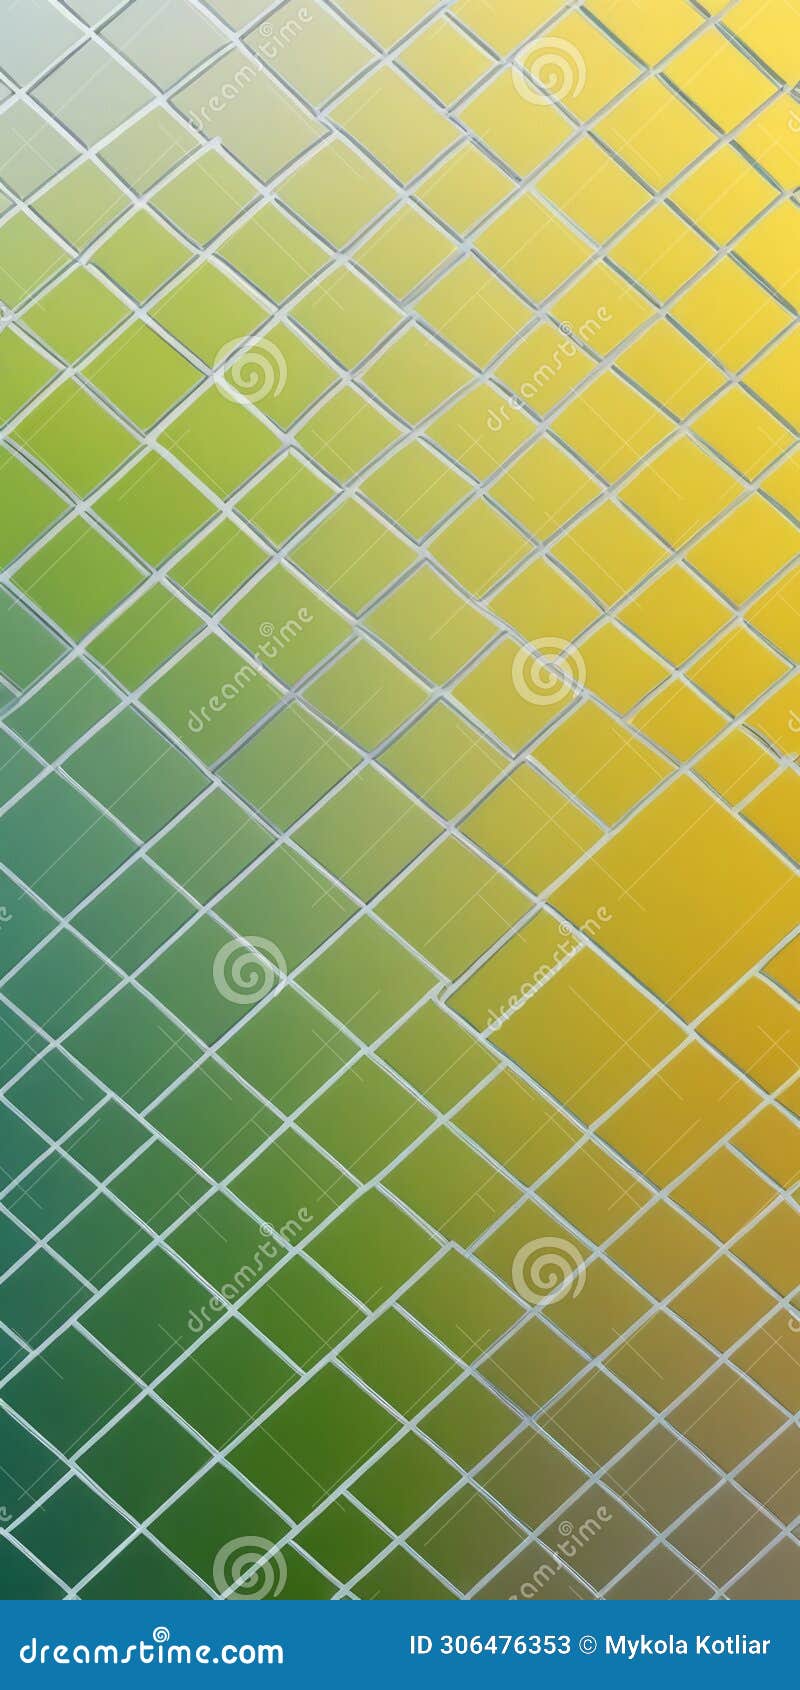 grid s in silver greenyellow